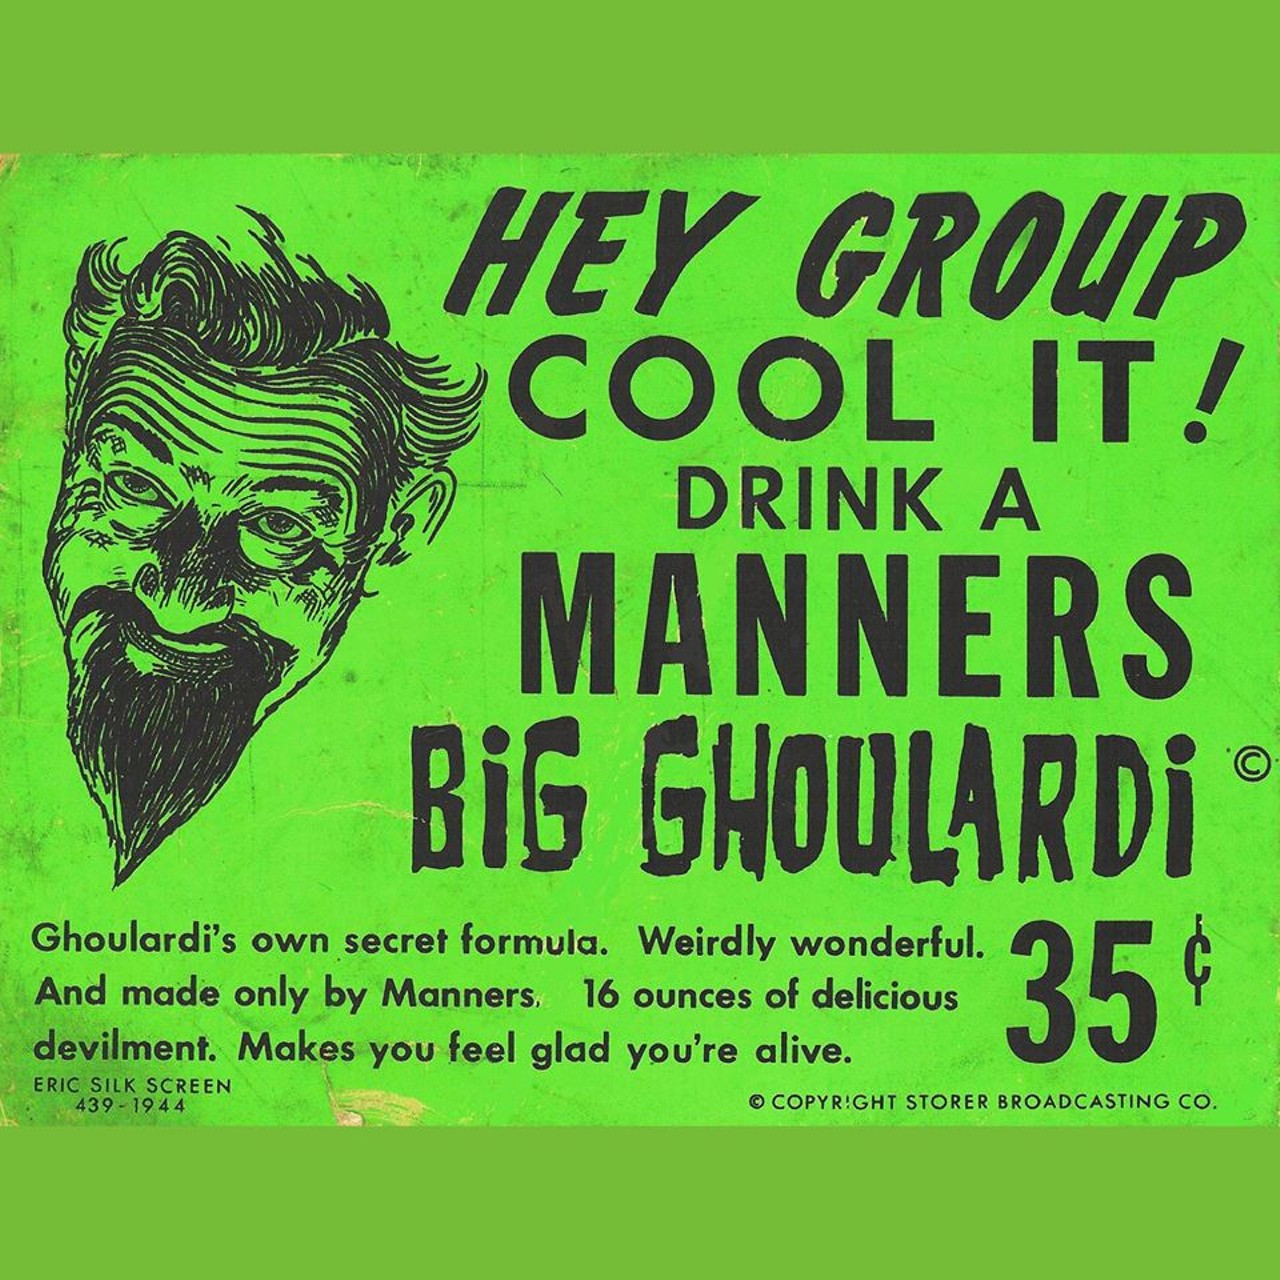 GULP DOWN A GHOULARDI AT BIG BOY
Big Boyd still exist, but until the 1990s, Manners Big Boy was its own sub-franchise, customized to its own liking. It wasn&#146;t tied to the big corporate bigwigs that run the restaurant today. That meant Clevelanders could suck down the delicious and terrifying Big Ghoulardi. Until its absorption by the bigger Big Boy, Manners served up this enigmatic beverage. (Photo courtesy of Cleveland Summertime Memories&#146; Facebook page)